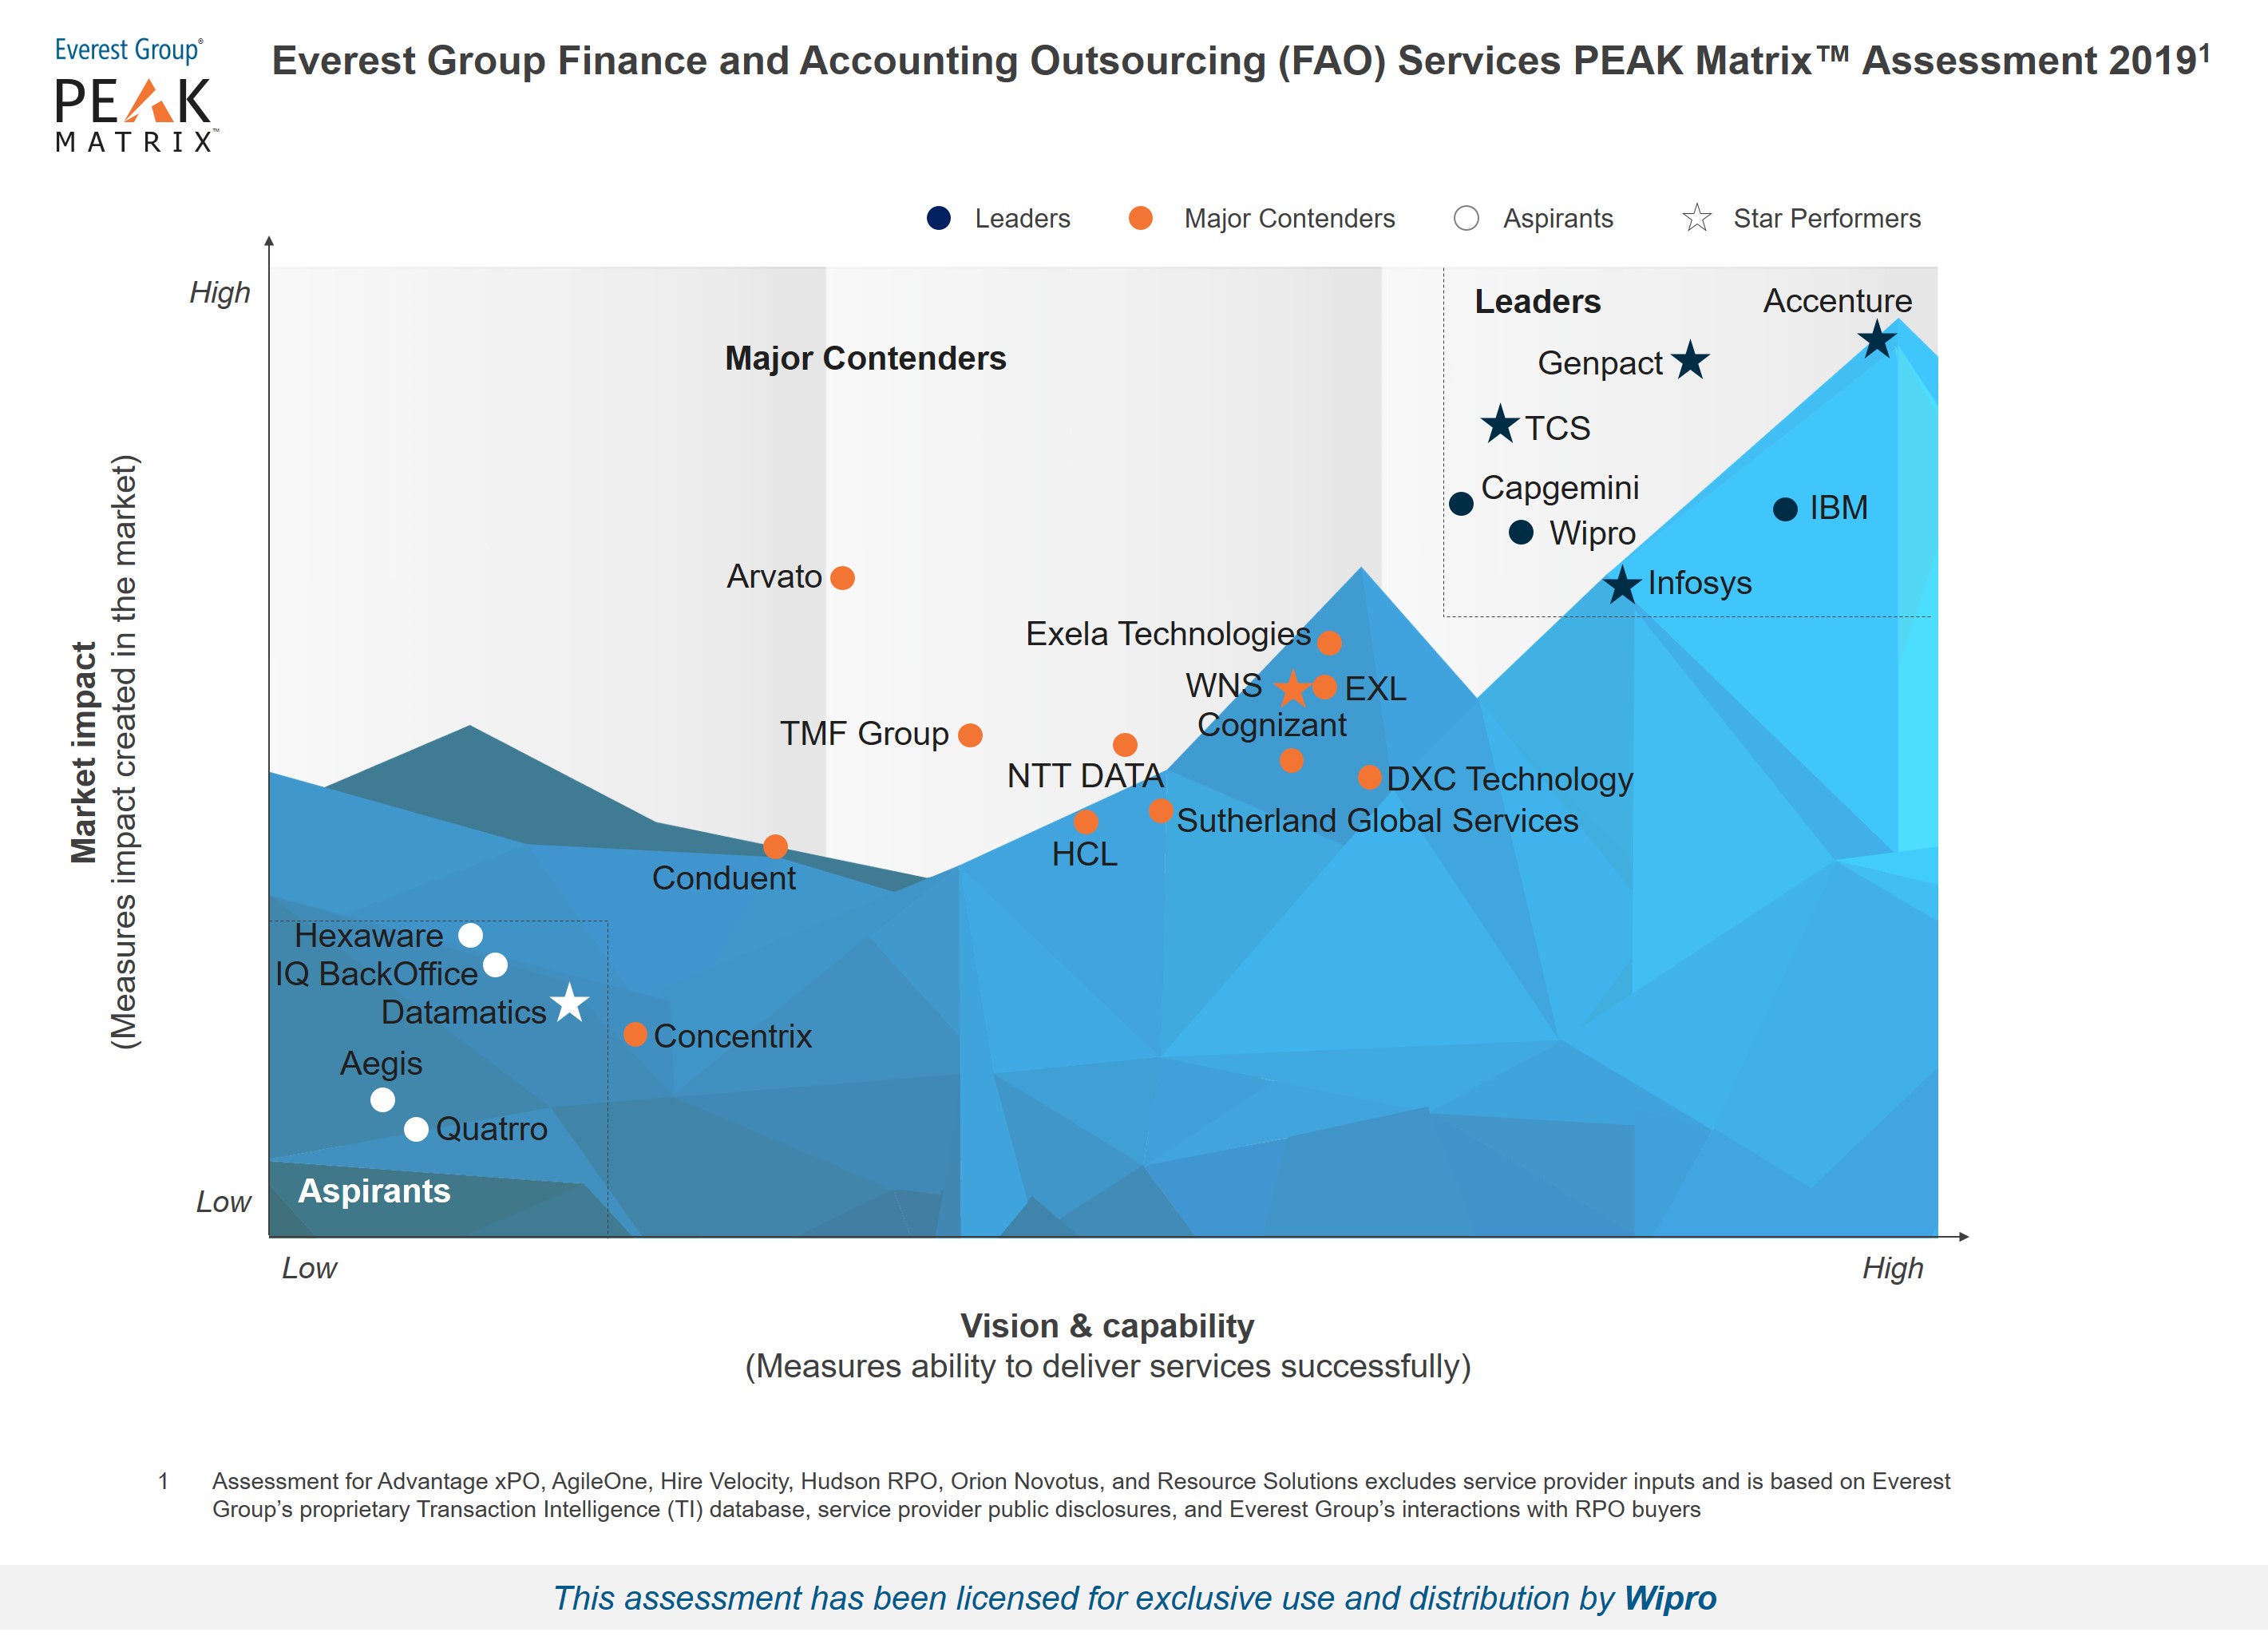 Wipro is a leader in Positioned as a leader in Everest Finance & Accounting Outsourcing Service Providers 2019 